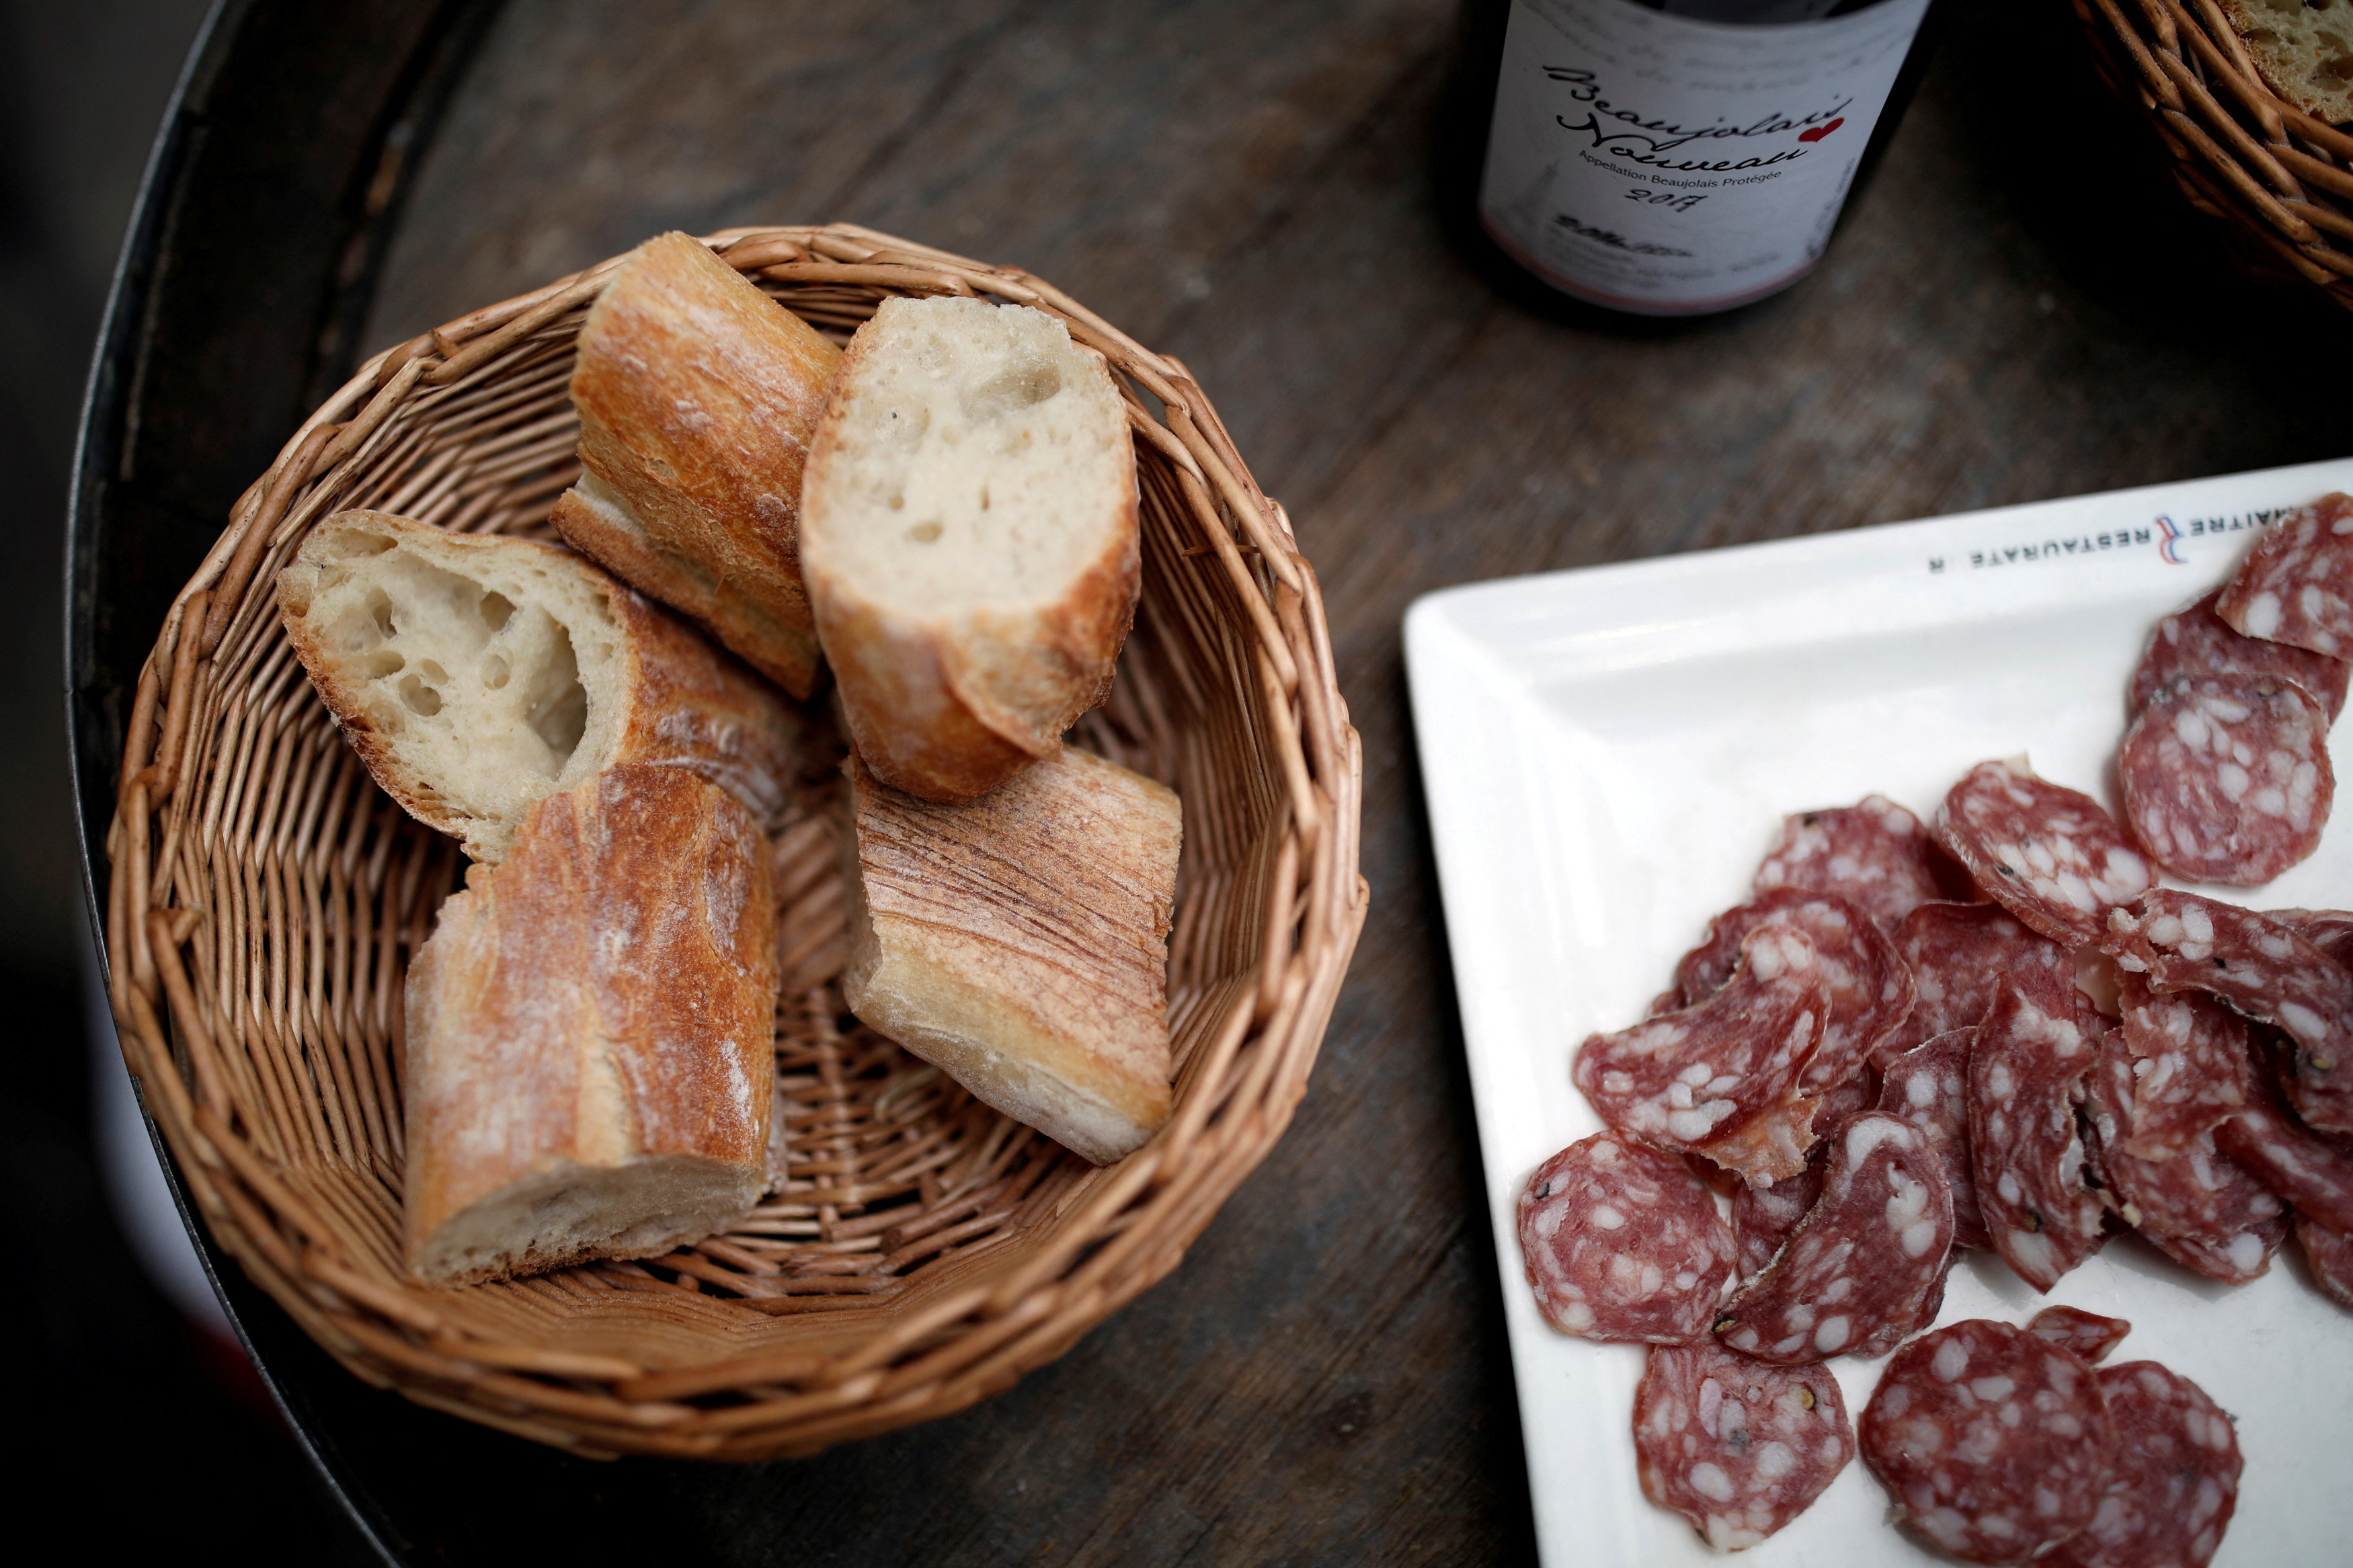 Pieces of French baguette and sausage are seen in a bistrot in Paris